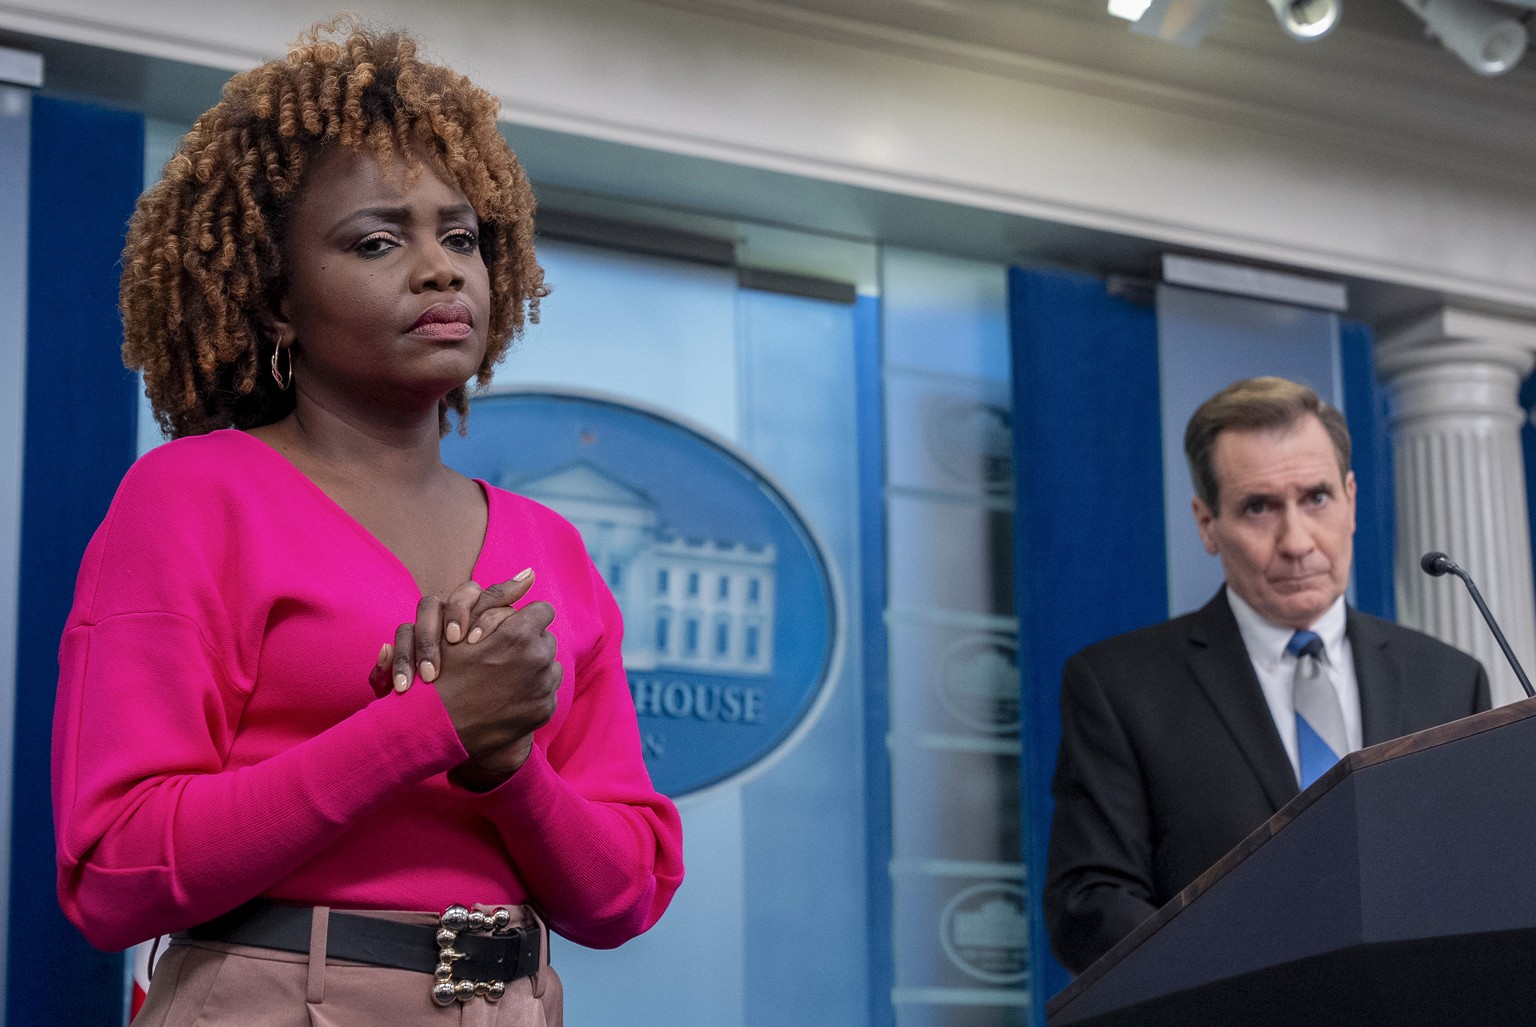 White House national security communications adviser John Kirby, accompanied by White House press secretary Karine Jean-Pierre, listens to a question from a reporter during a press briefing at the Whi ...